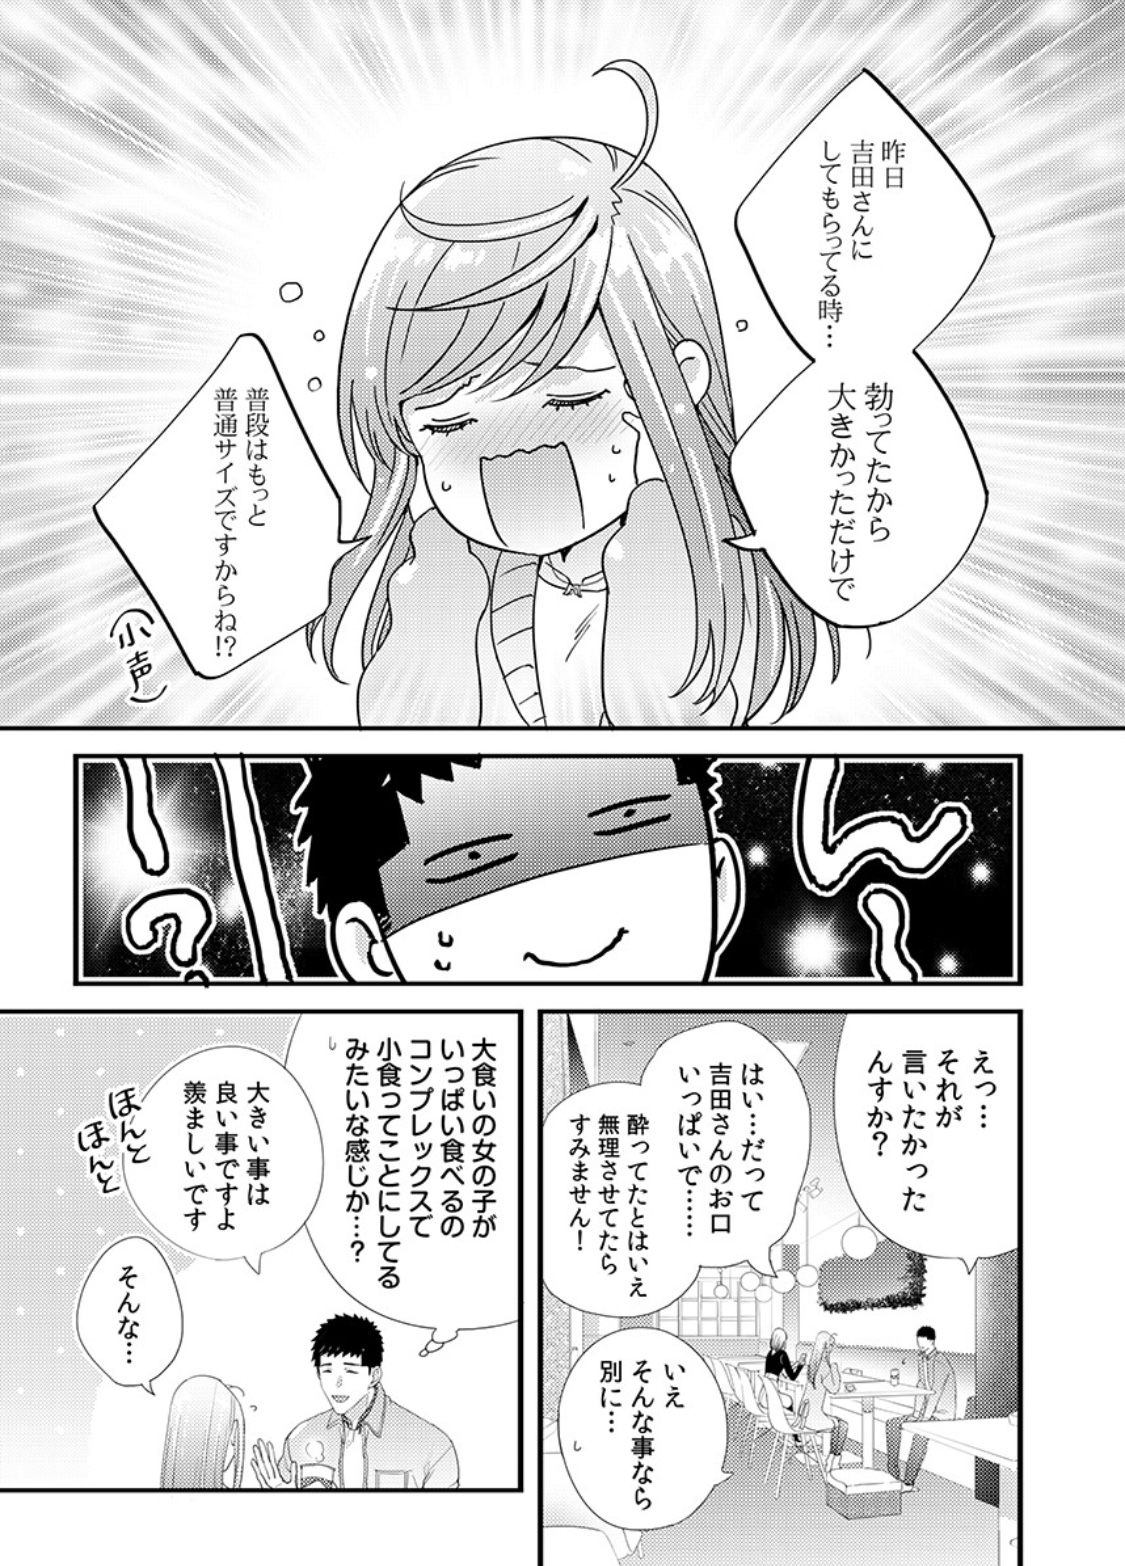 Please Let Me Hold You Futaba-San! Ch. 1+2 [二区] 抱かせてくださいッ双葉さん！【特別修正版】